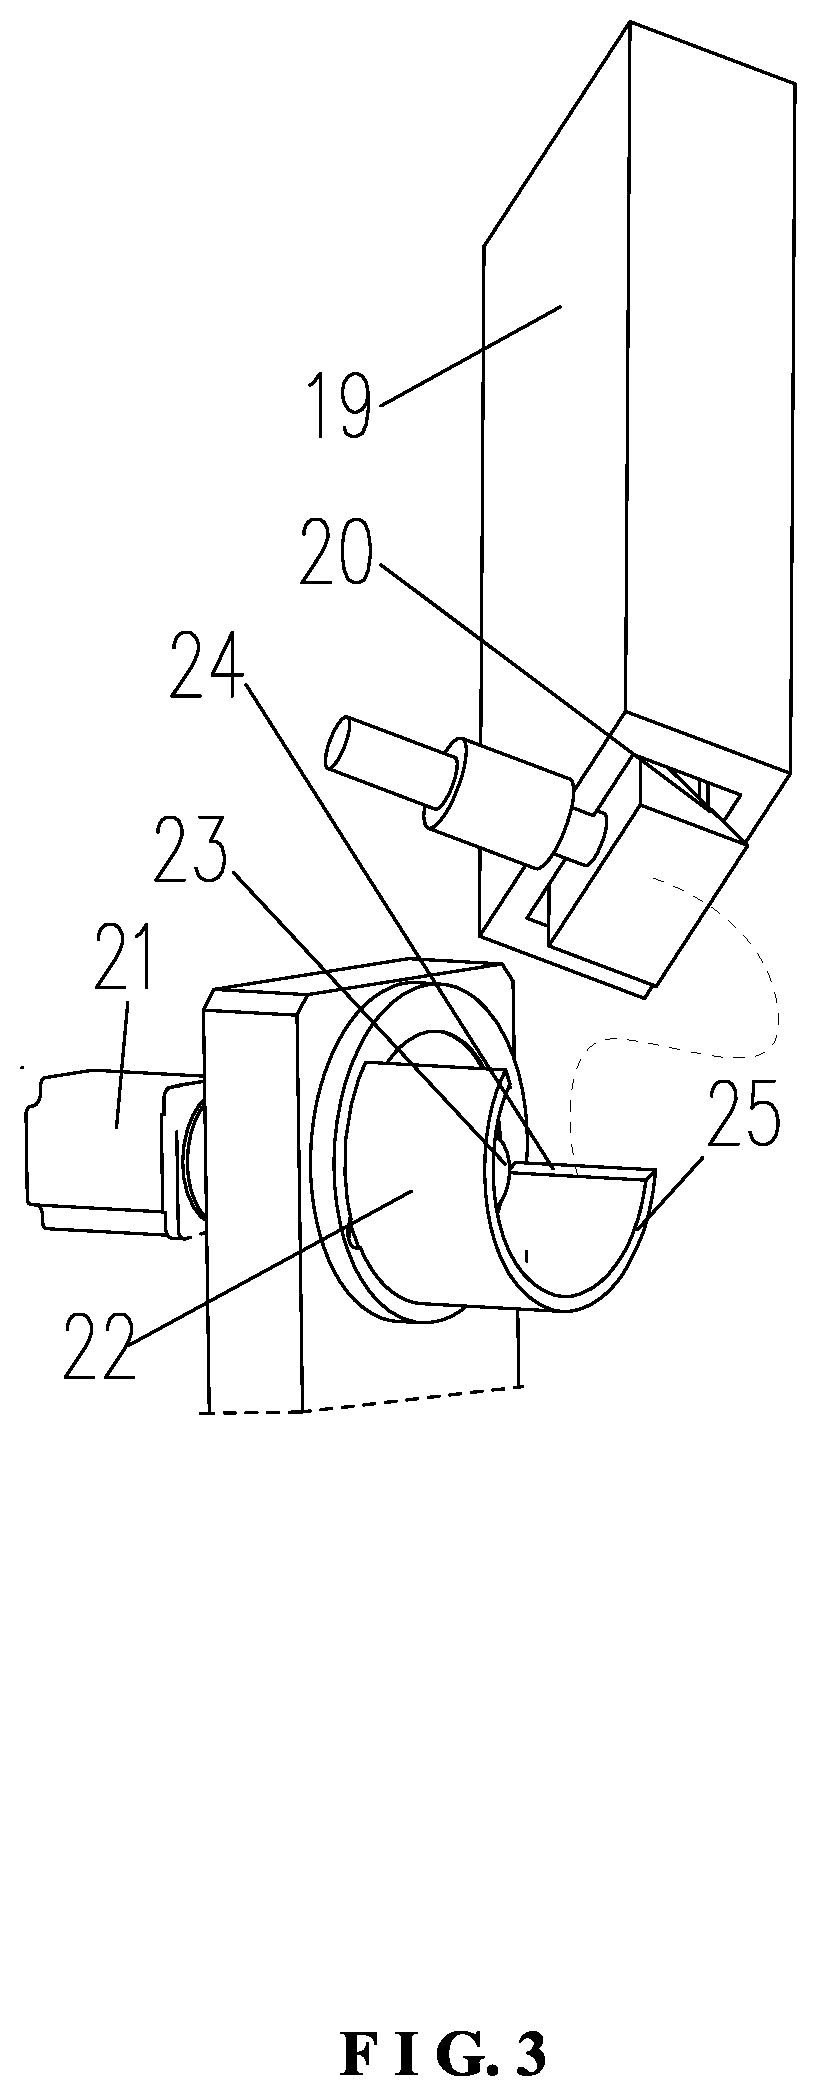 Method for assembling dual-head pulling rods